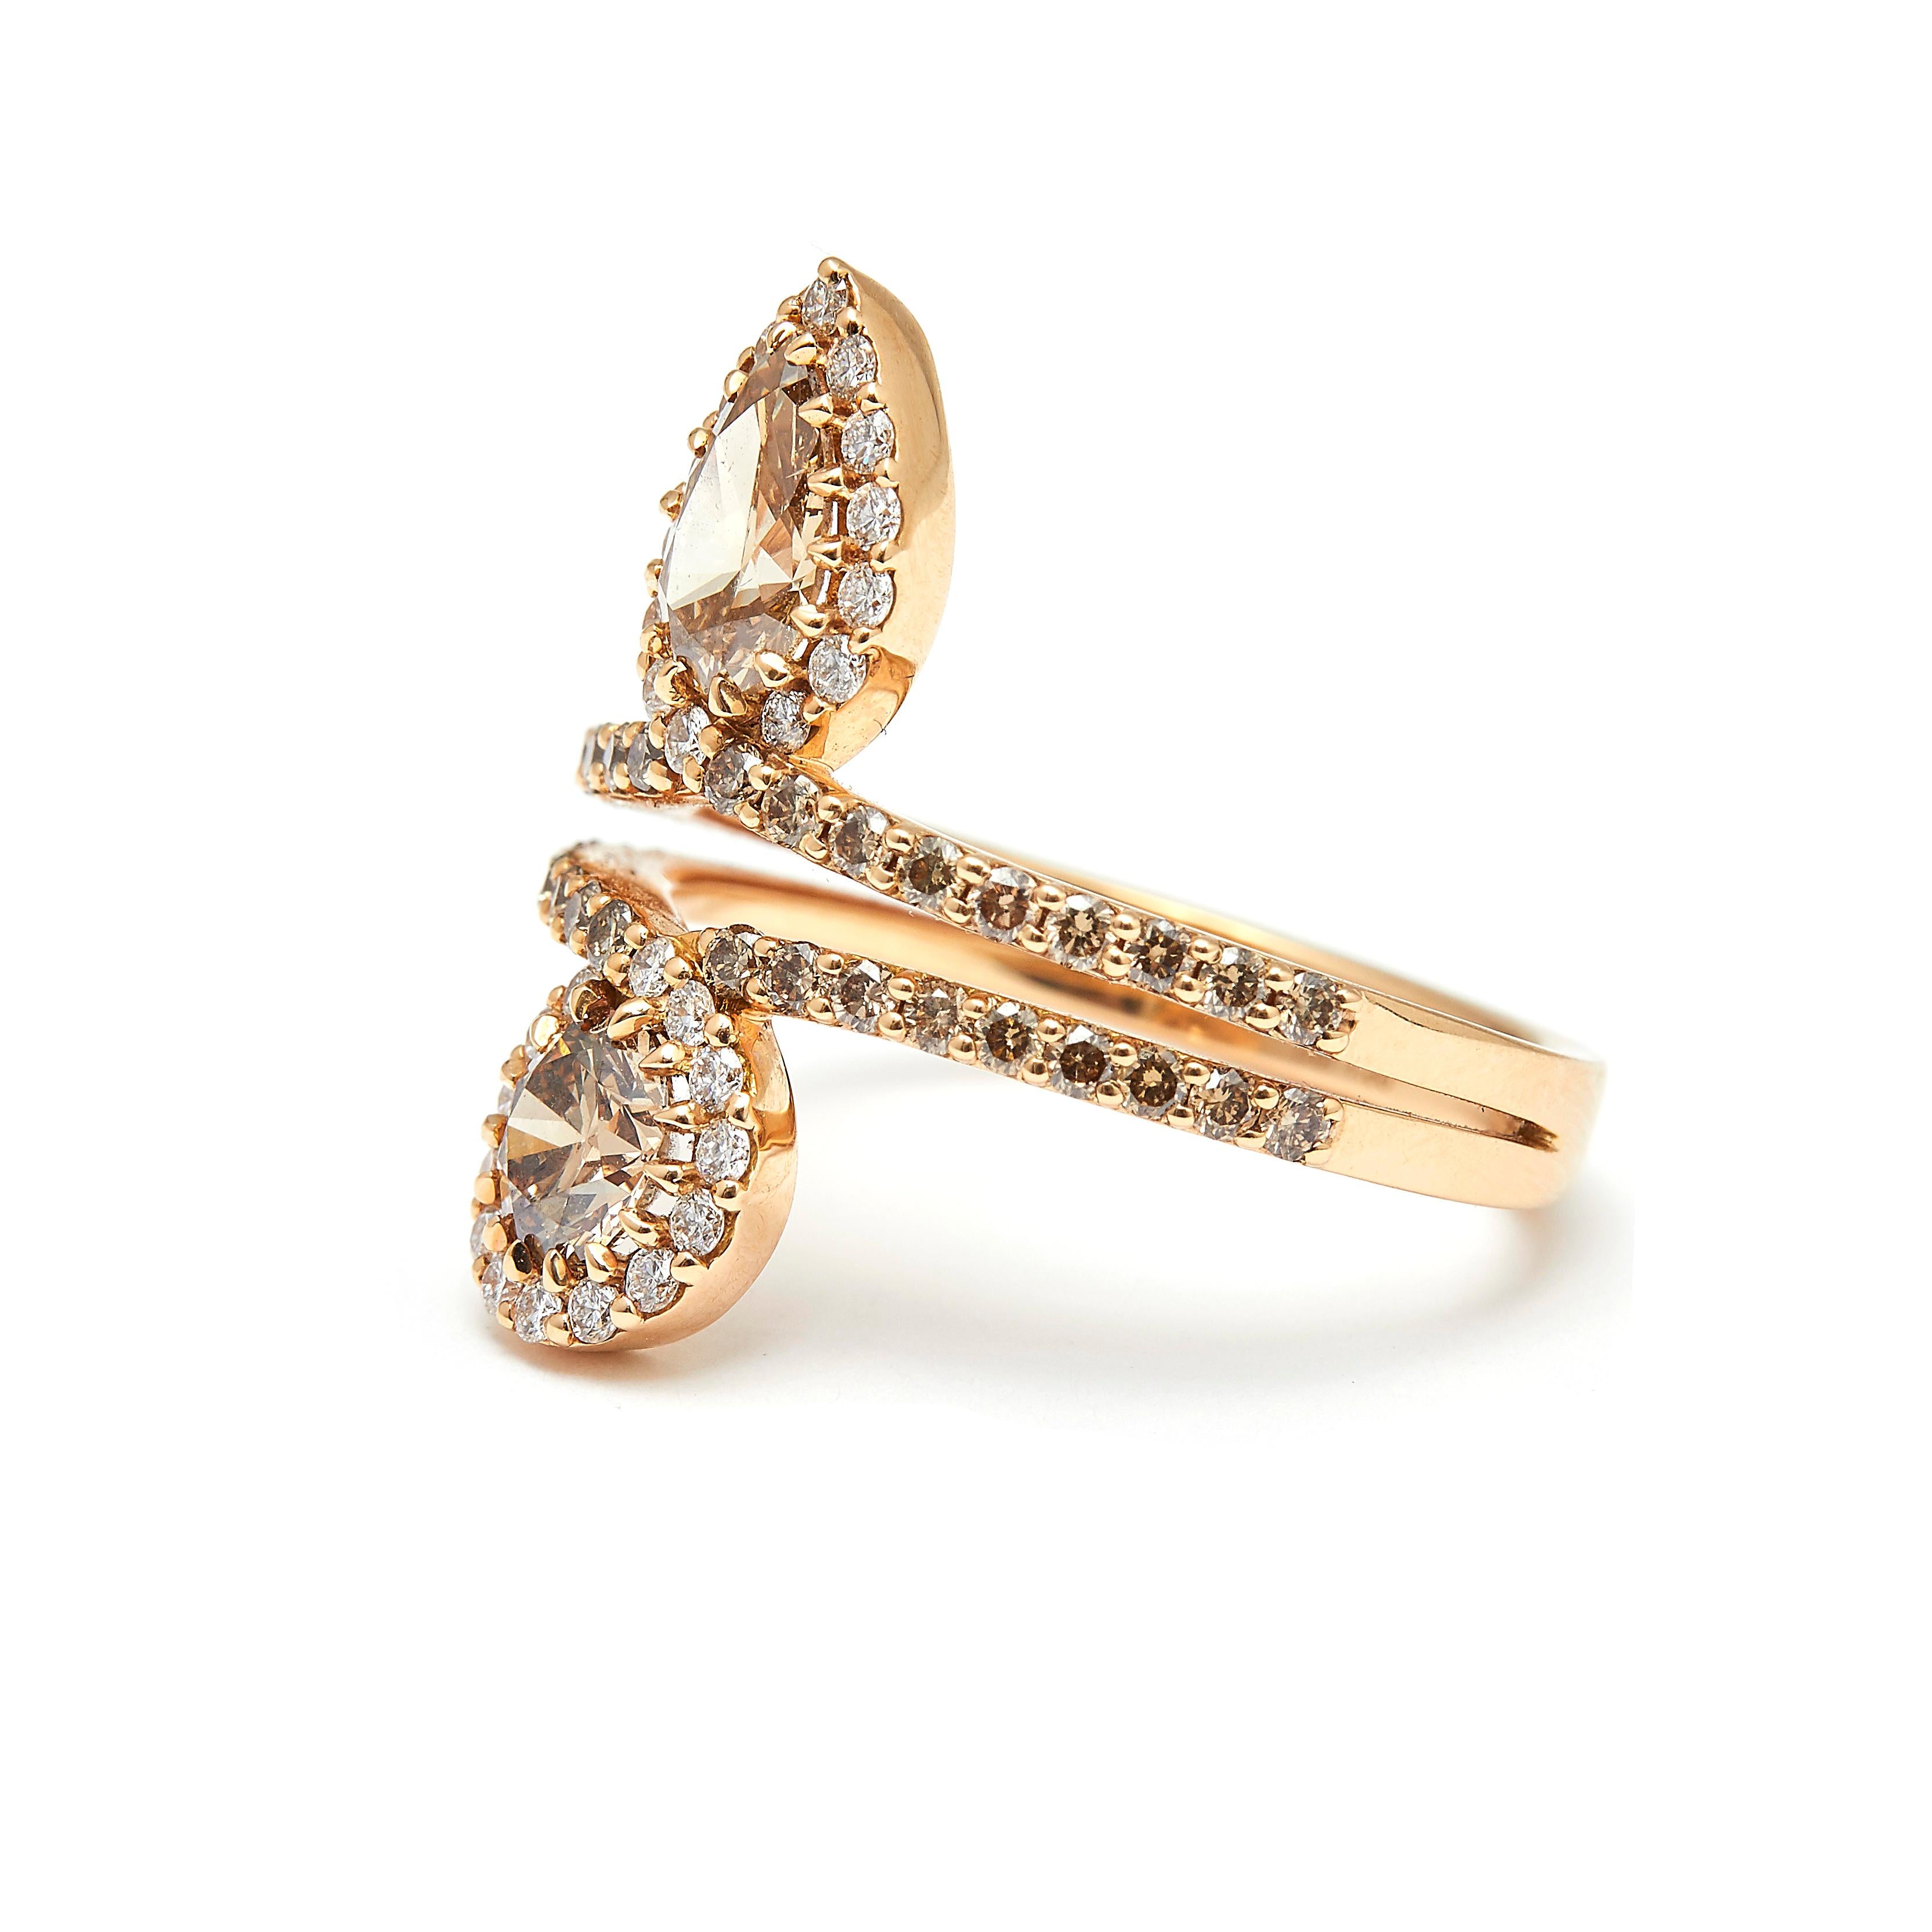 This really modern ring is edgy and fun and features warm tones of rose gold and brown diamonds. Its a really cool piece that is unique and sure to constantly garner compliments. Total brown diamonds 1.56ct and total white diamonds 0.26ct.